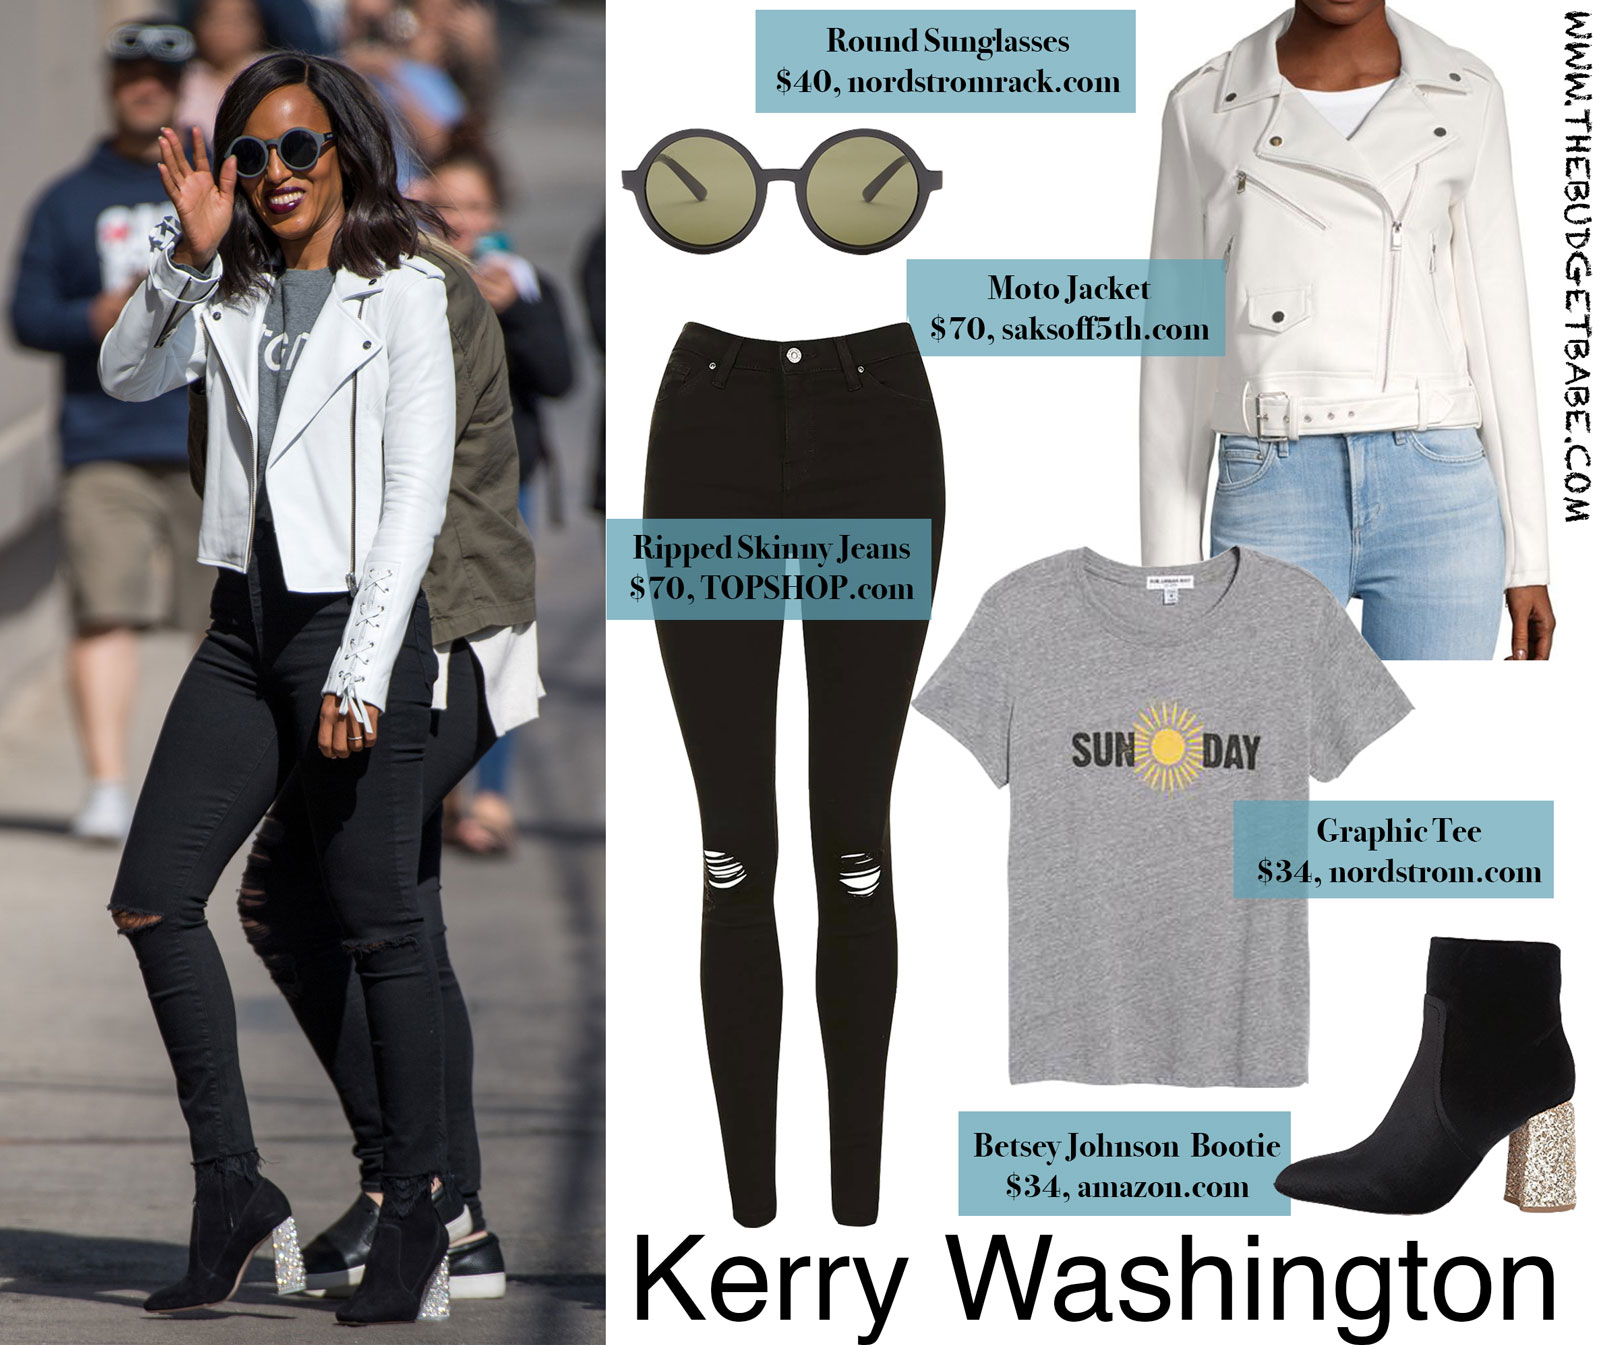 Kerry Washington White Moto Jacket and Glitter Heel Bootie Look for Less